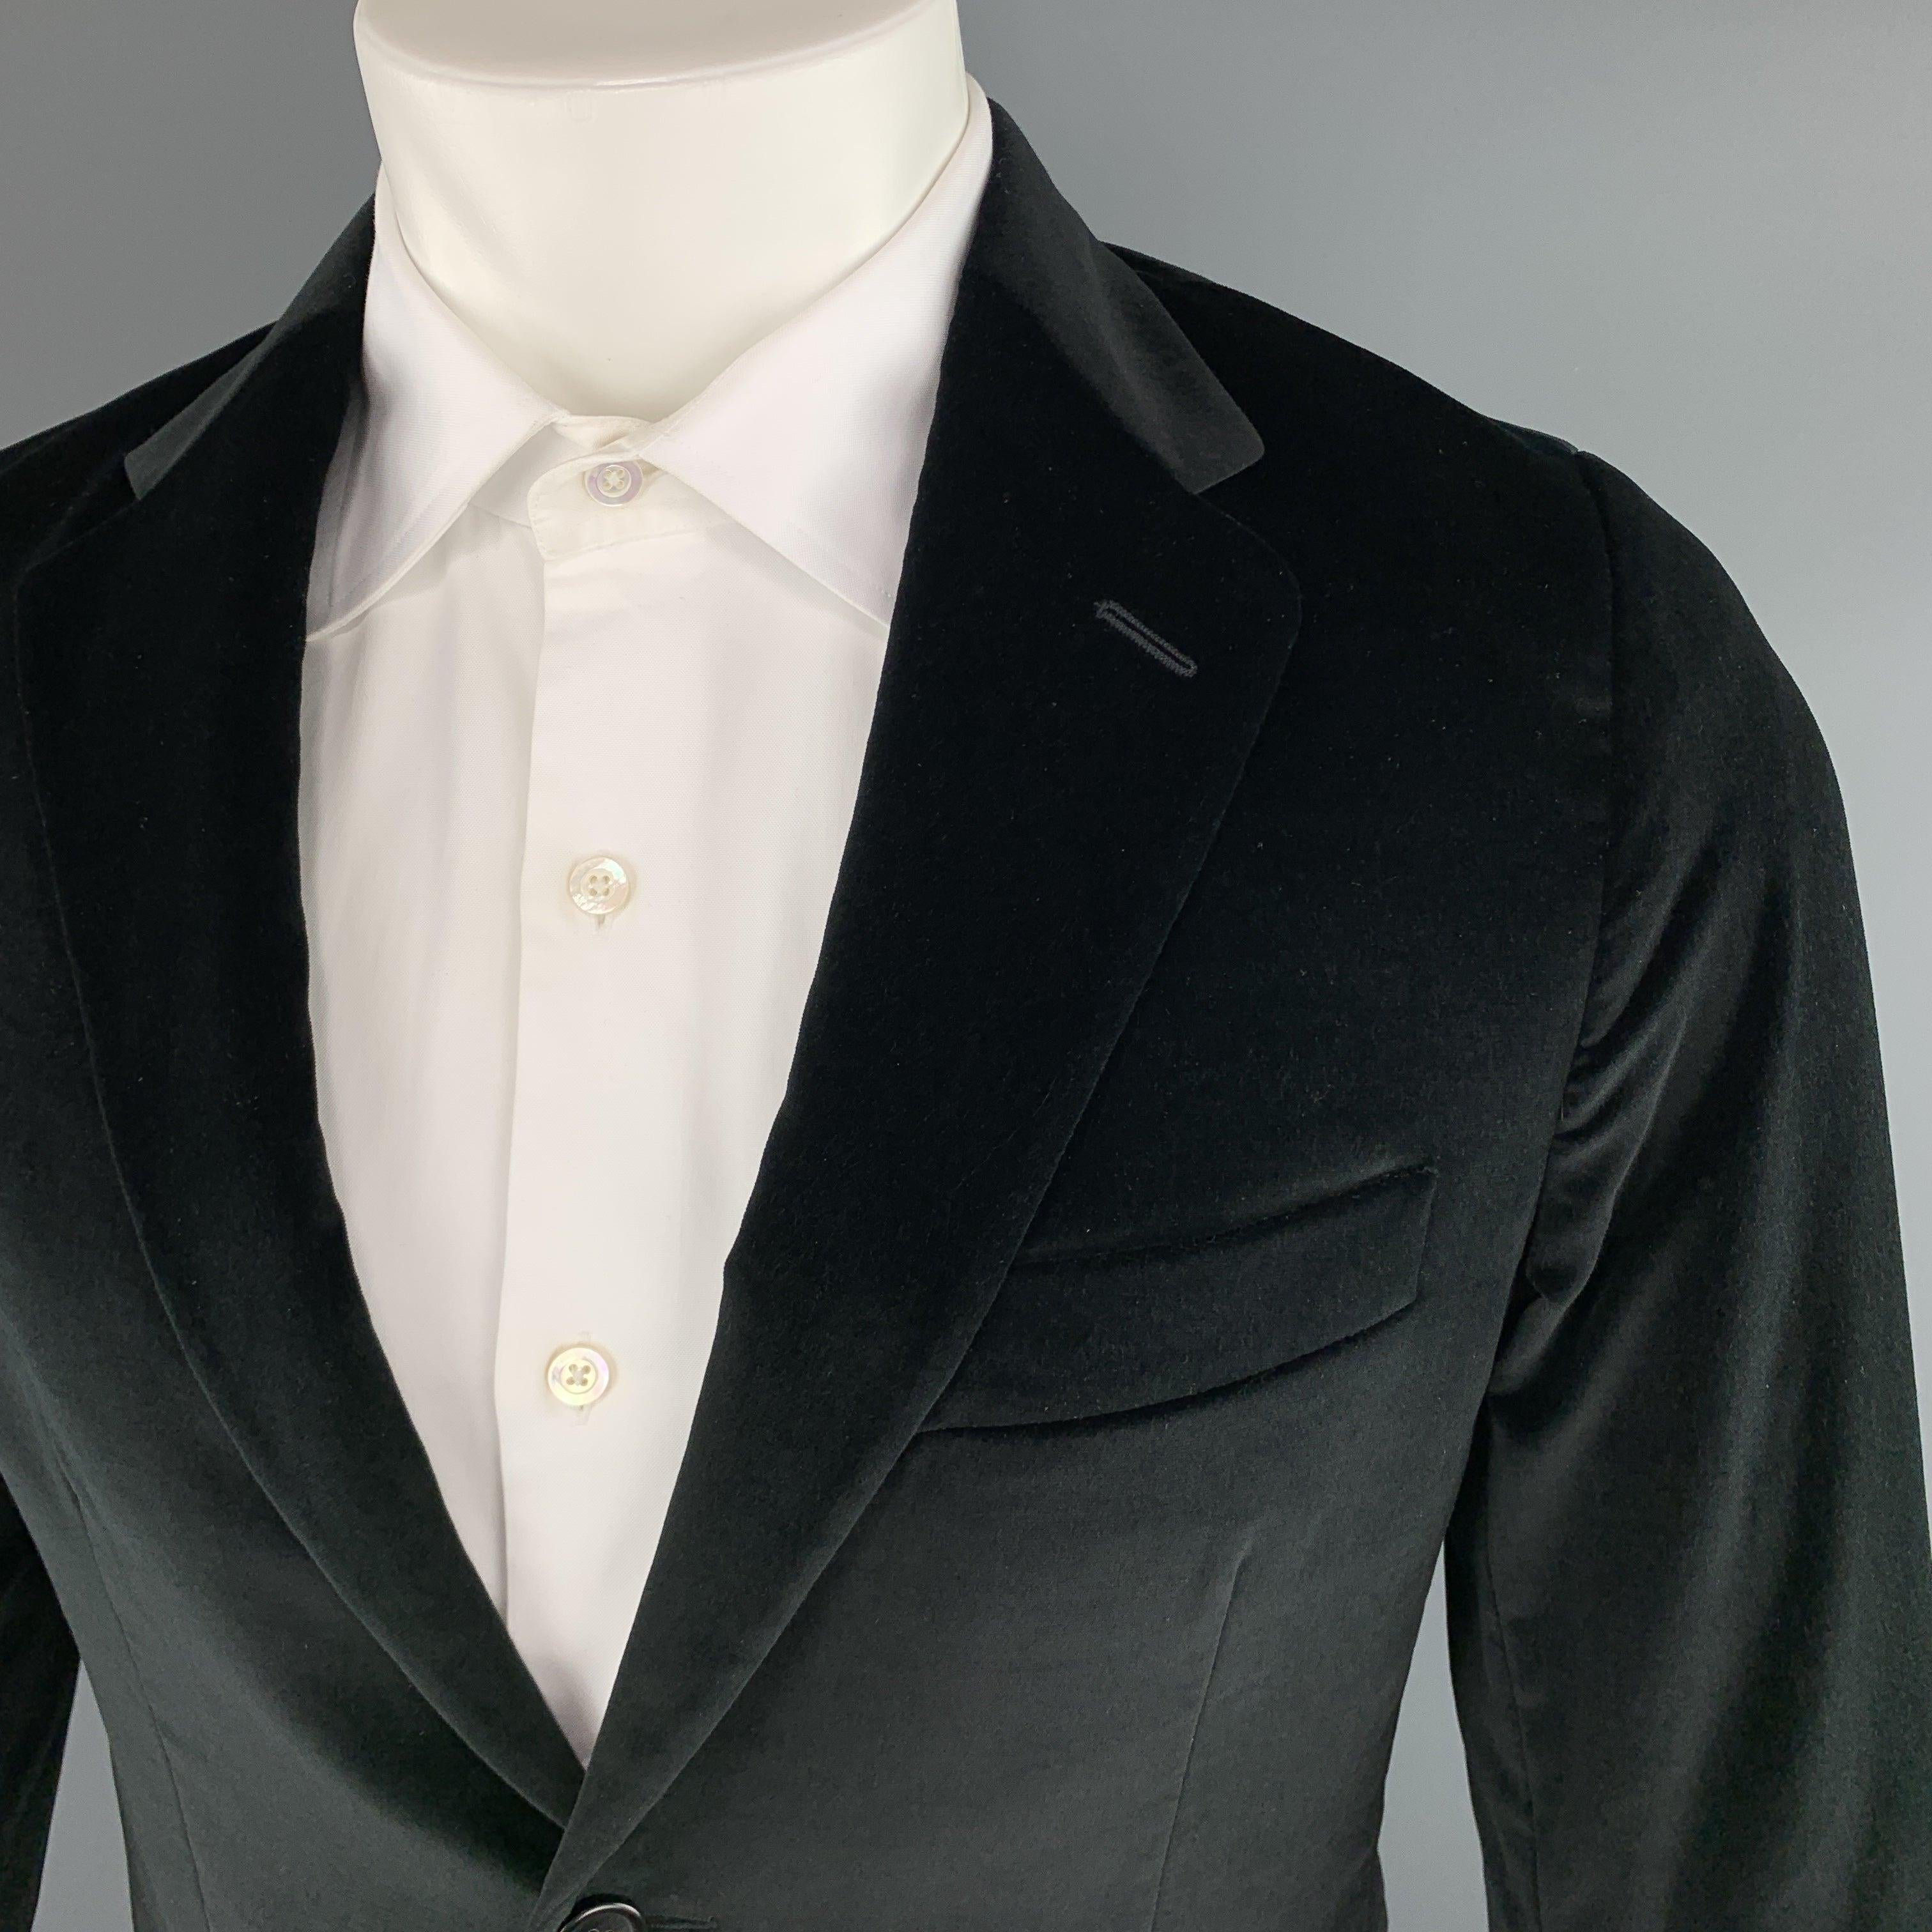 THEORY
sport coat comes in black velvet with a notch lapel, single breasted, two button front, and single vented back. Made in Italy.Excellent Pre-Owned Condition. 

Marked:   38 R 

Measurements: 
 
Shoulder: 15 inches Chest:
40 inches Sleeve:
25